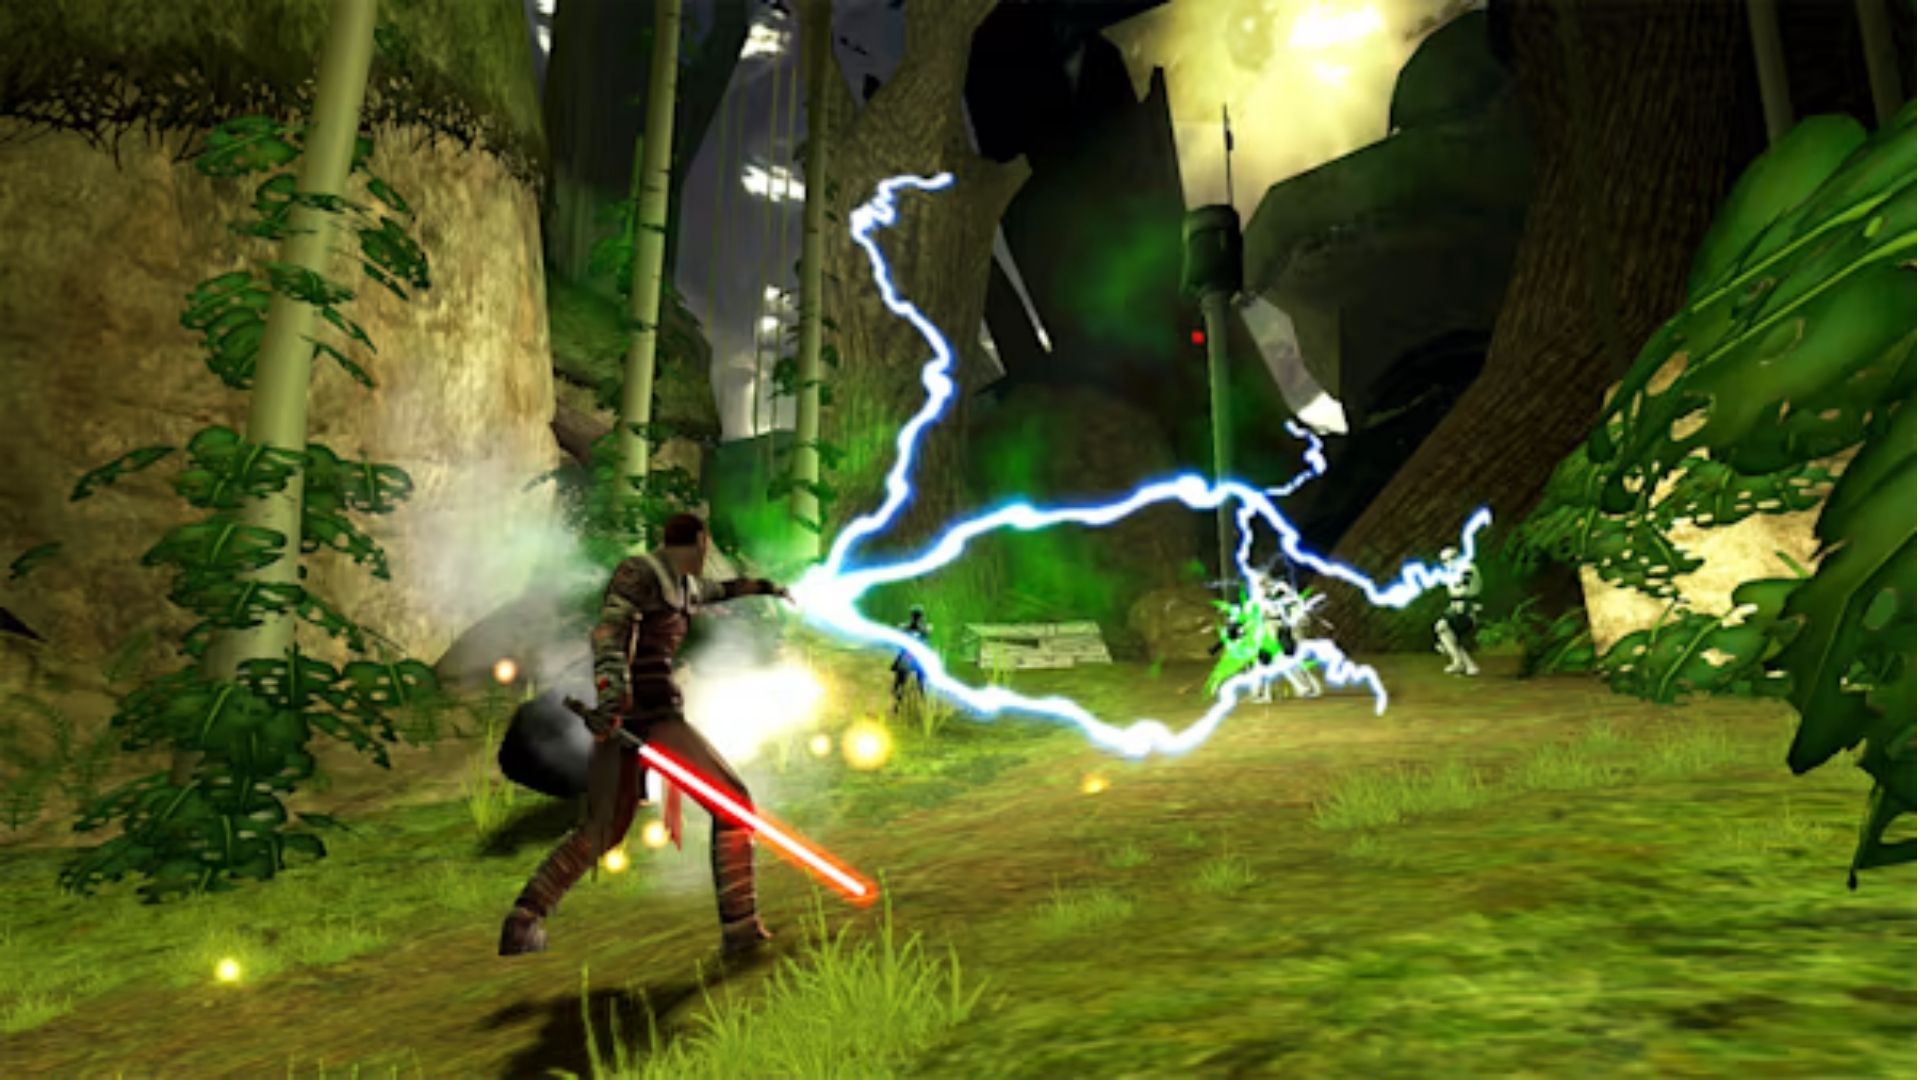 Video Games in April: STAR WARS: The Force Unleashed